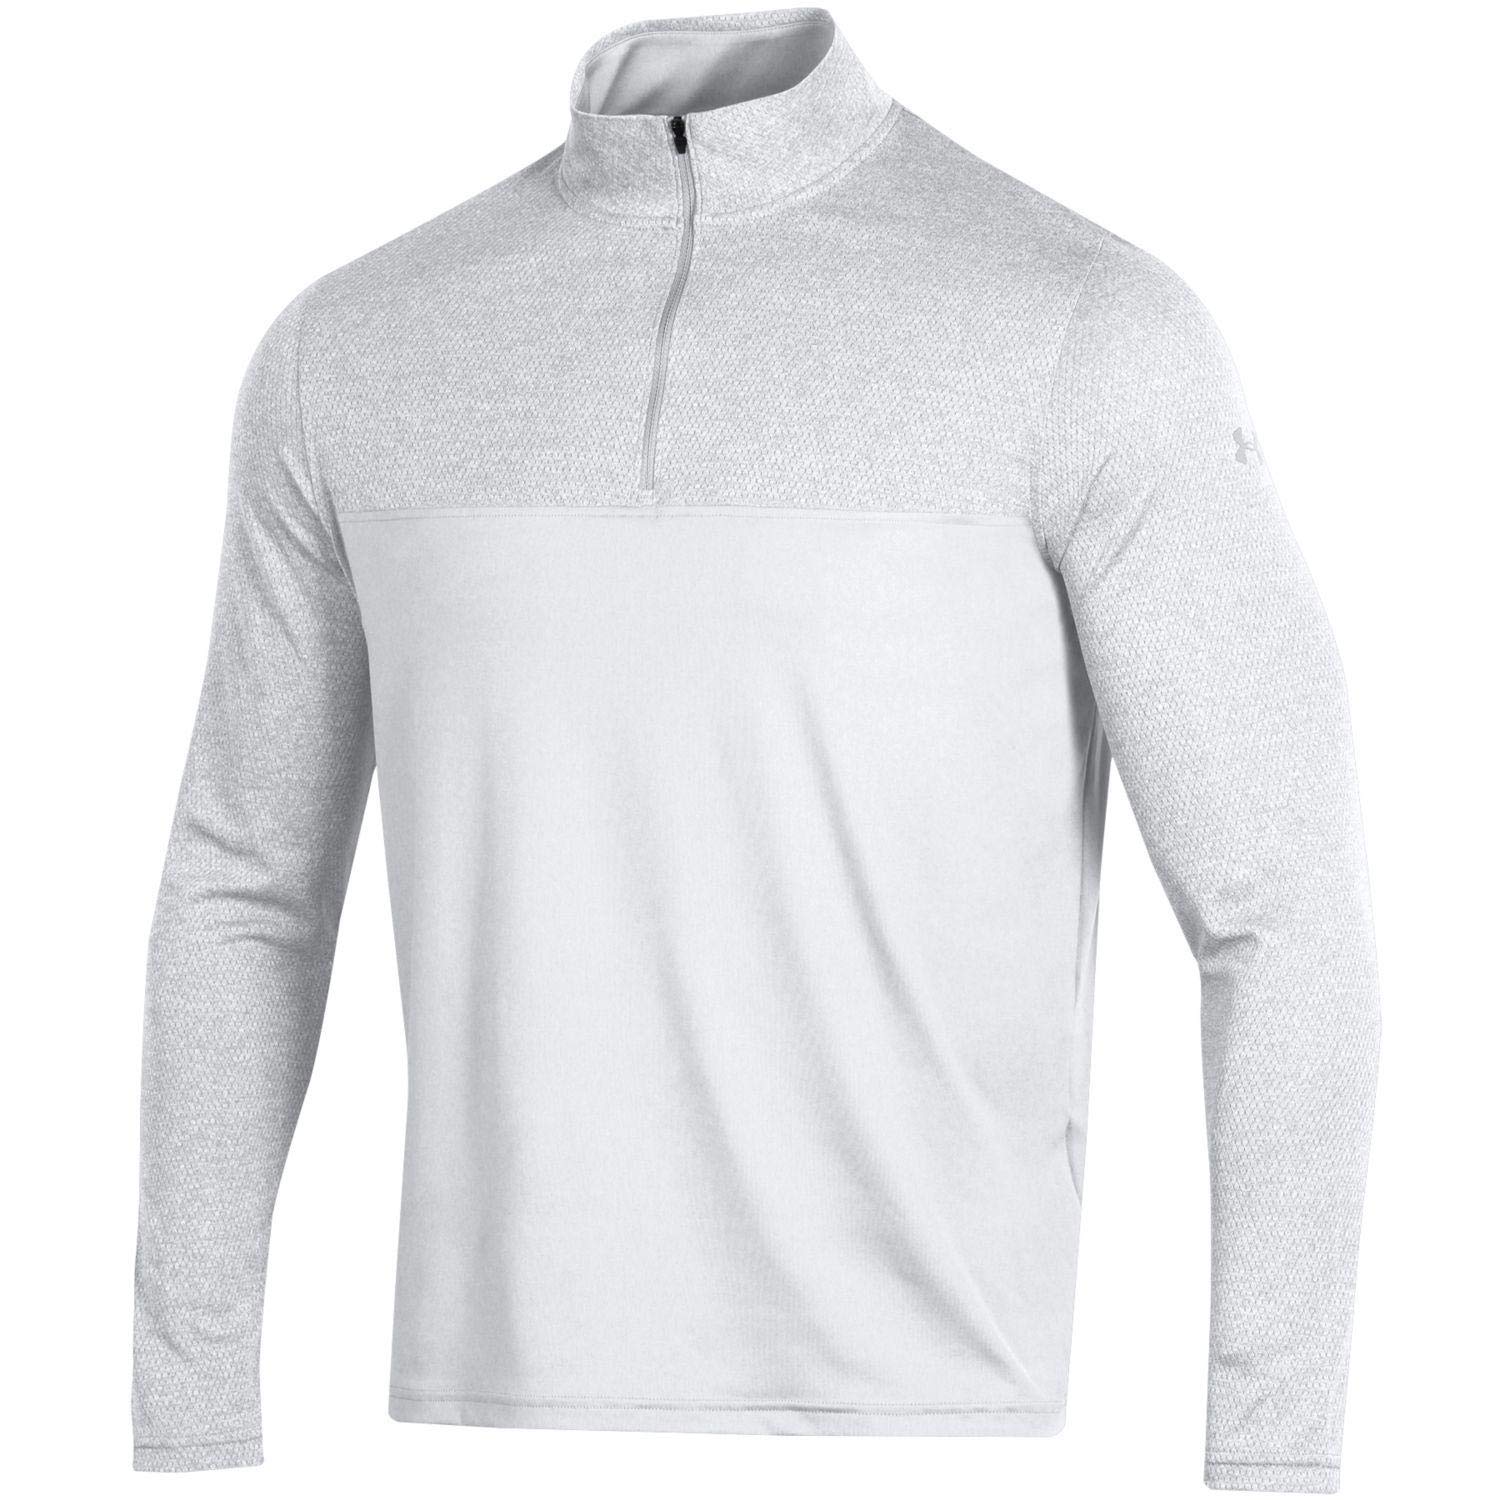 Under Armour Mens 2019 Scratch Golf Pullovers